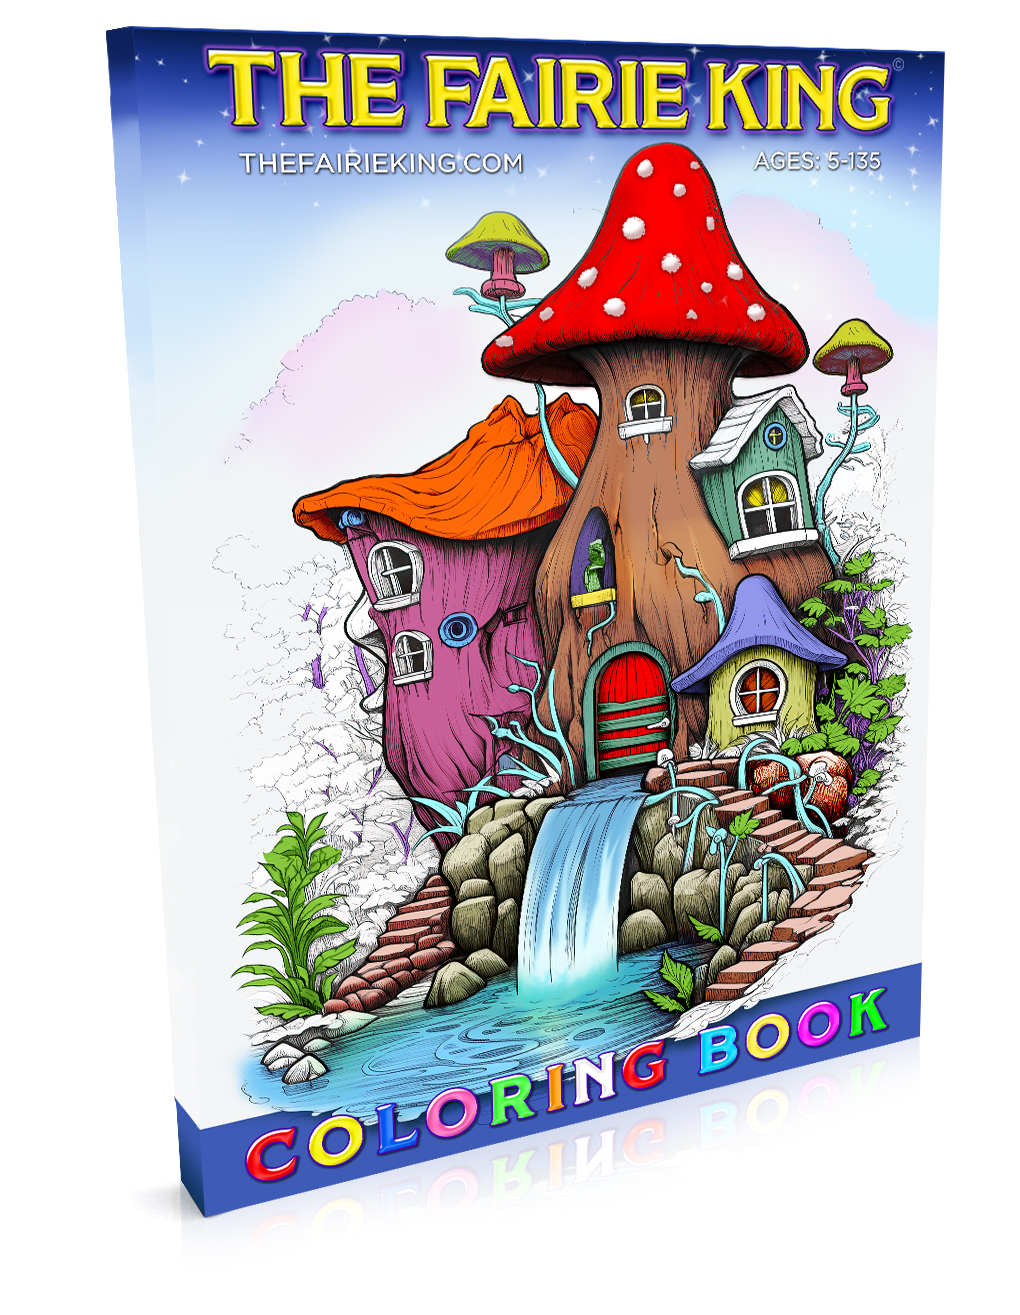 The Fairie King Coloring Book